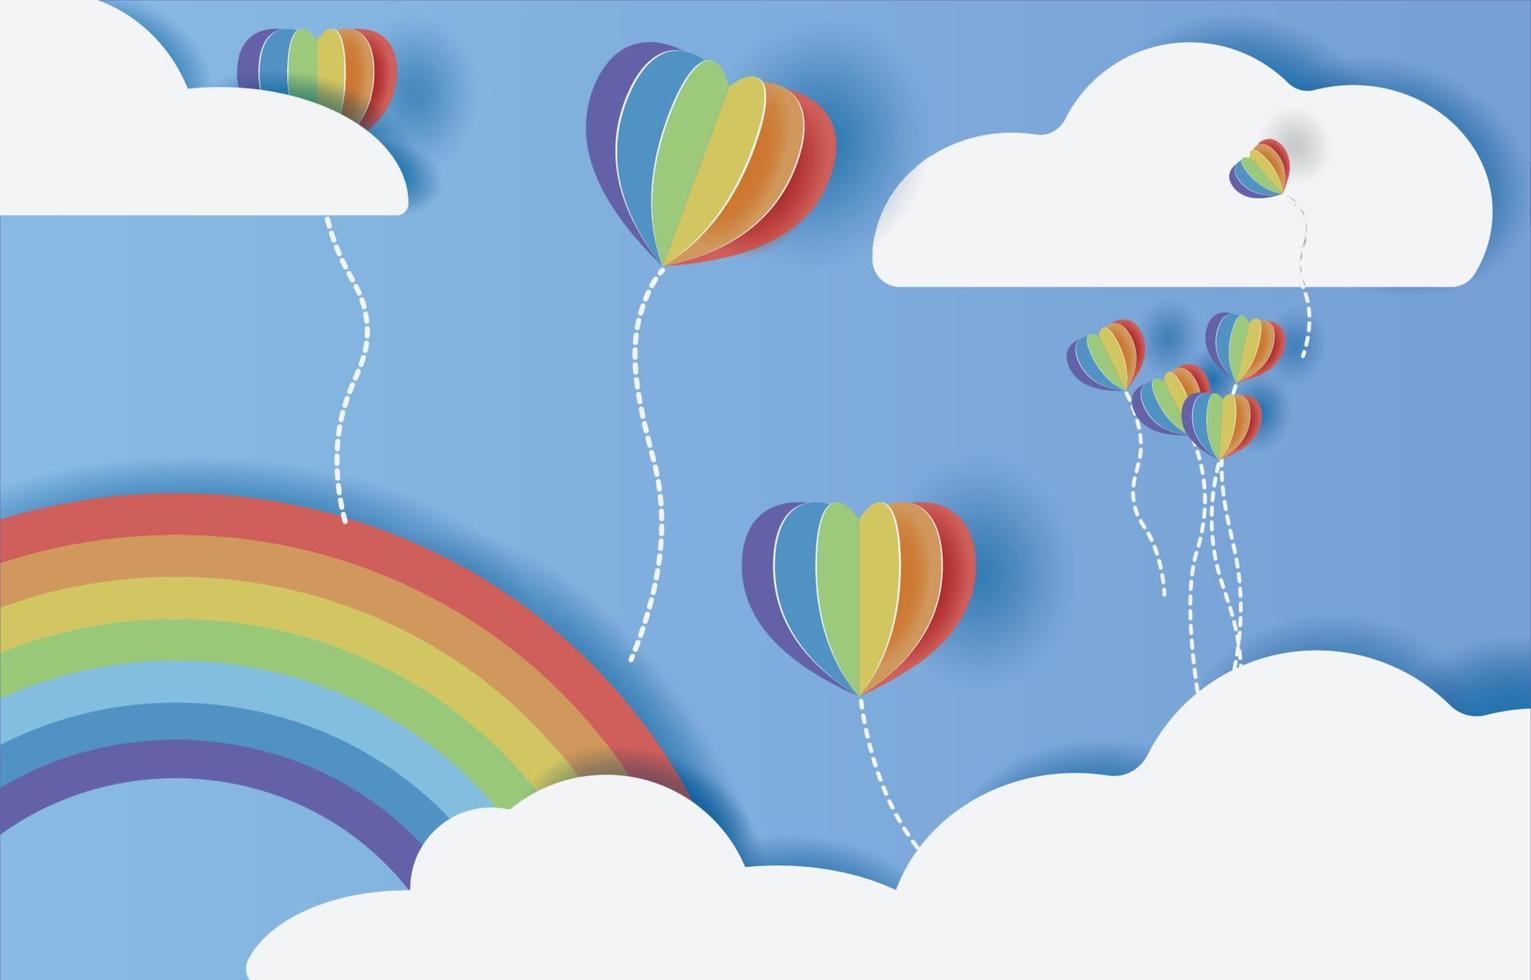 Pride Rainbow And Balloons in The Clouds Paper Cut Style Background Design vector